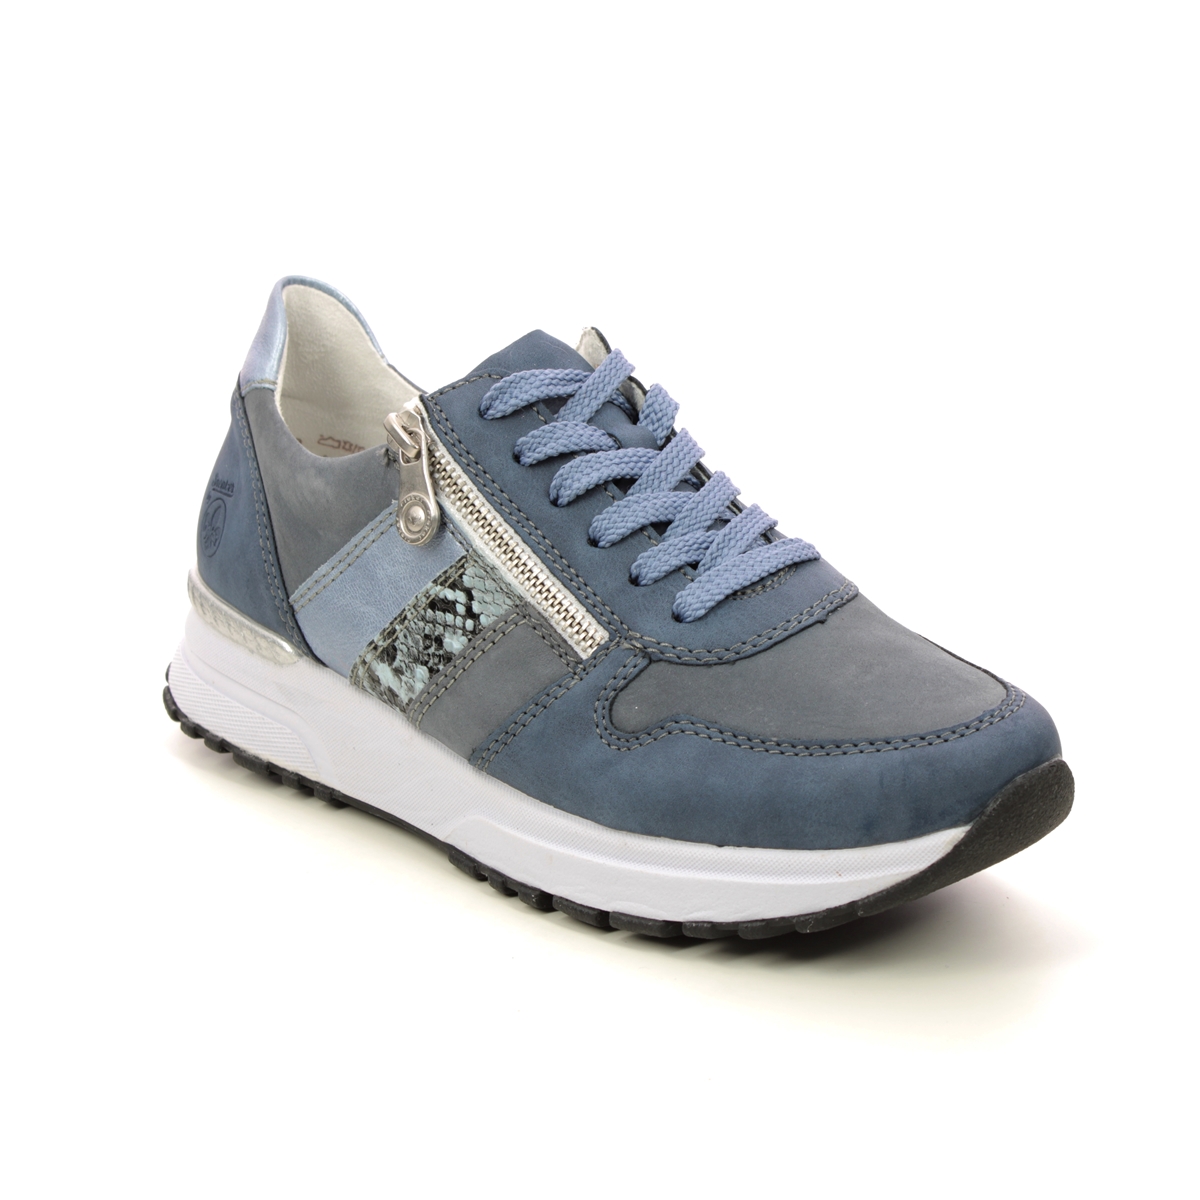 Rieker Govict Denim Leather Womens Trainers N7421-14 In Size 41 In Plain Denim Leather